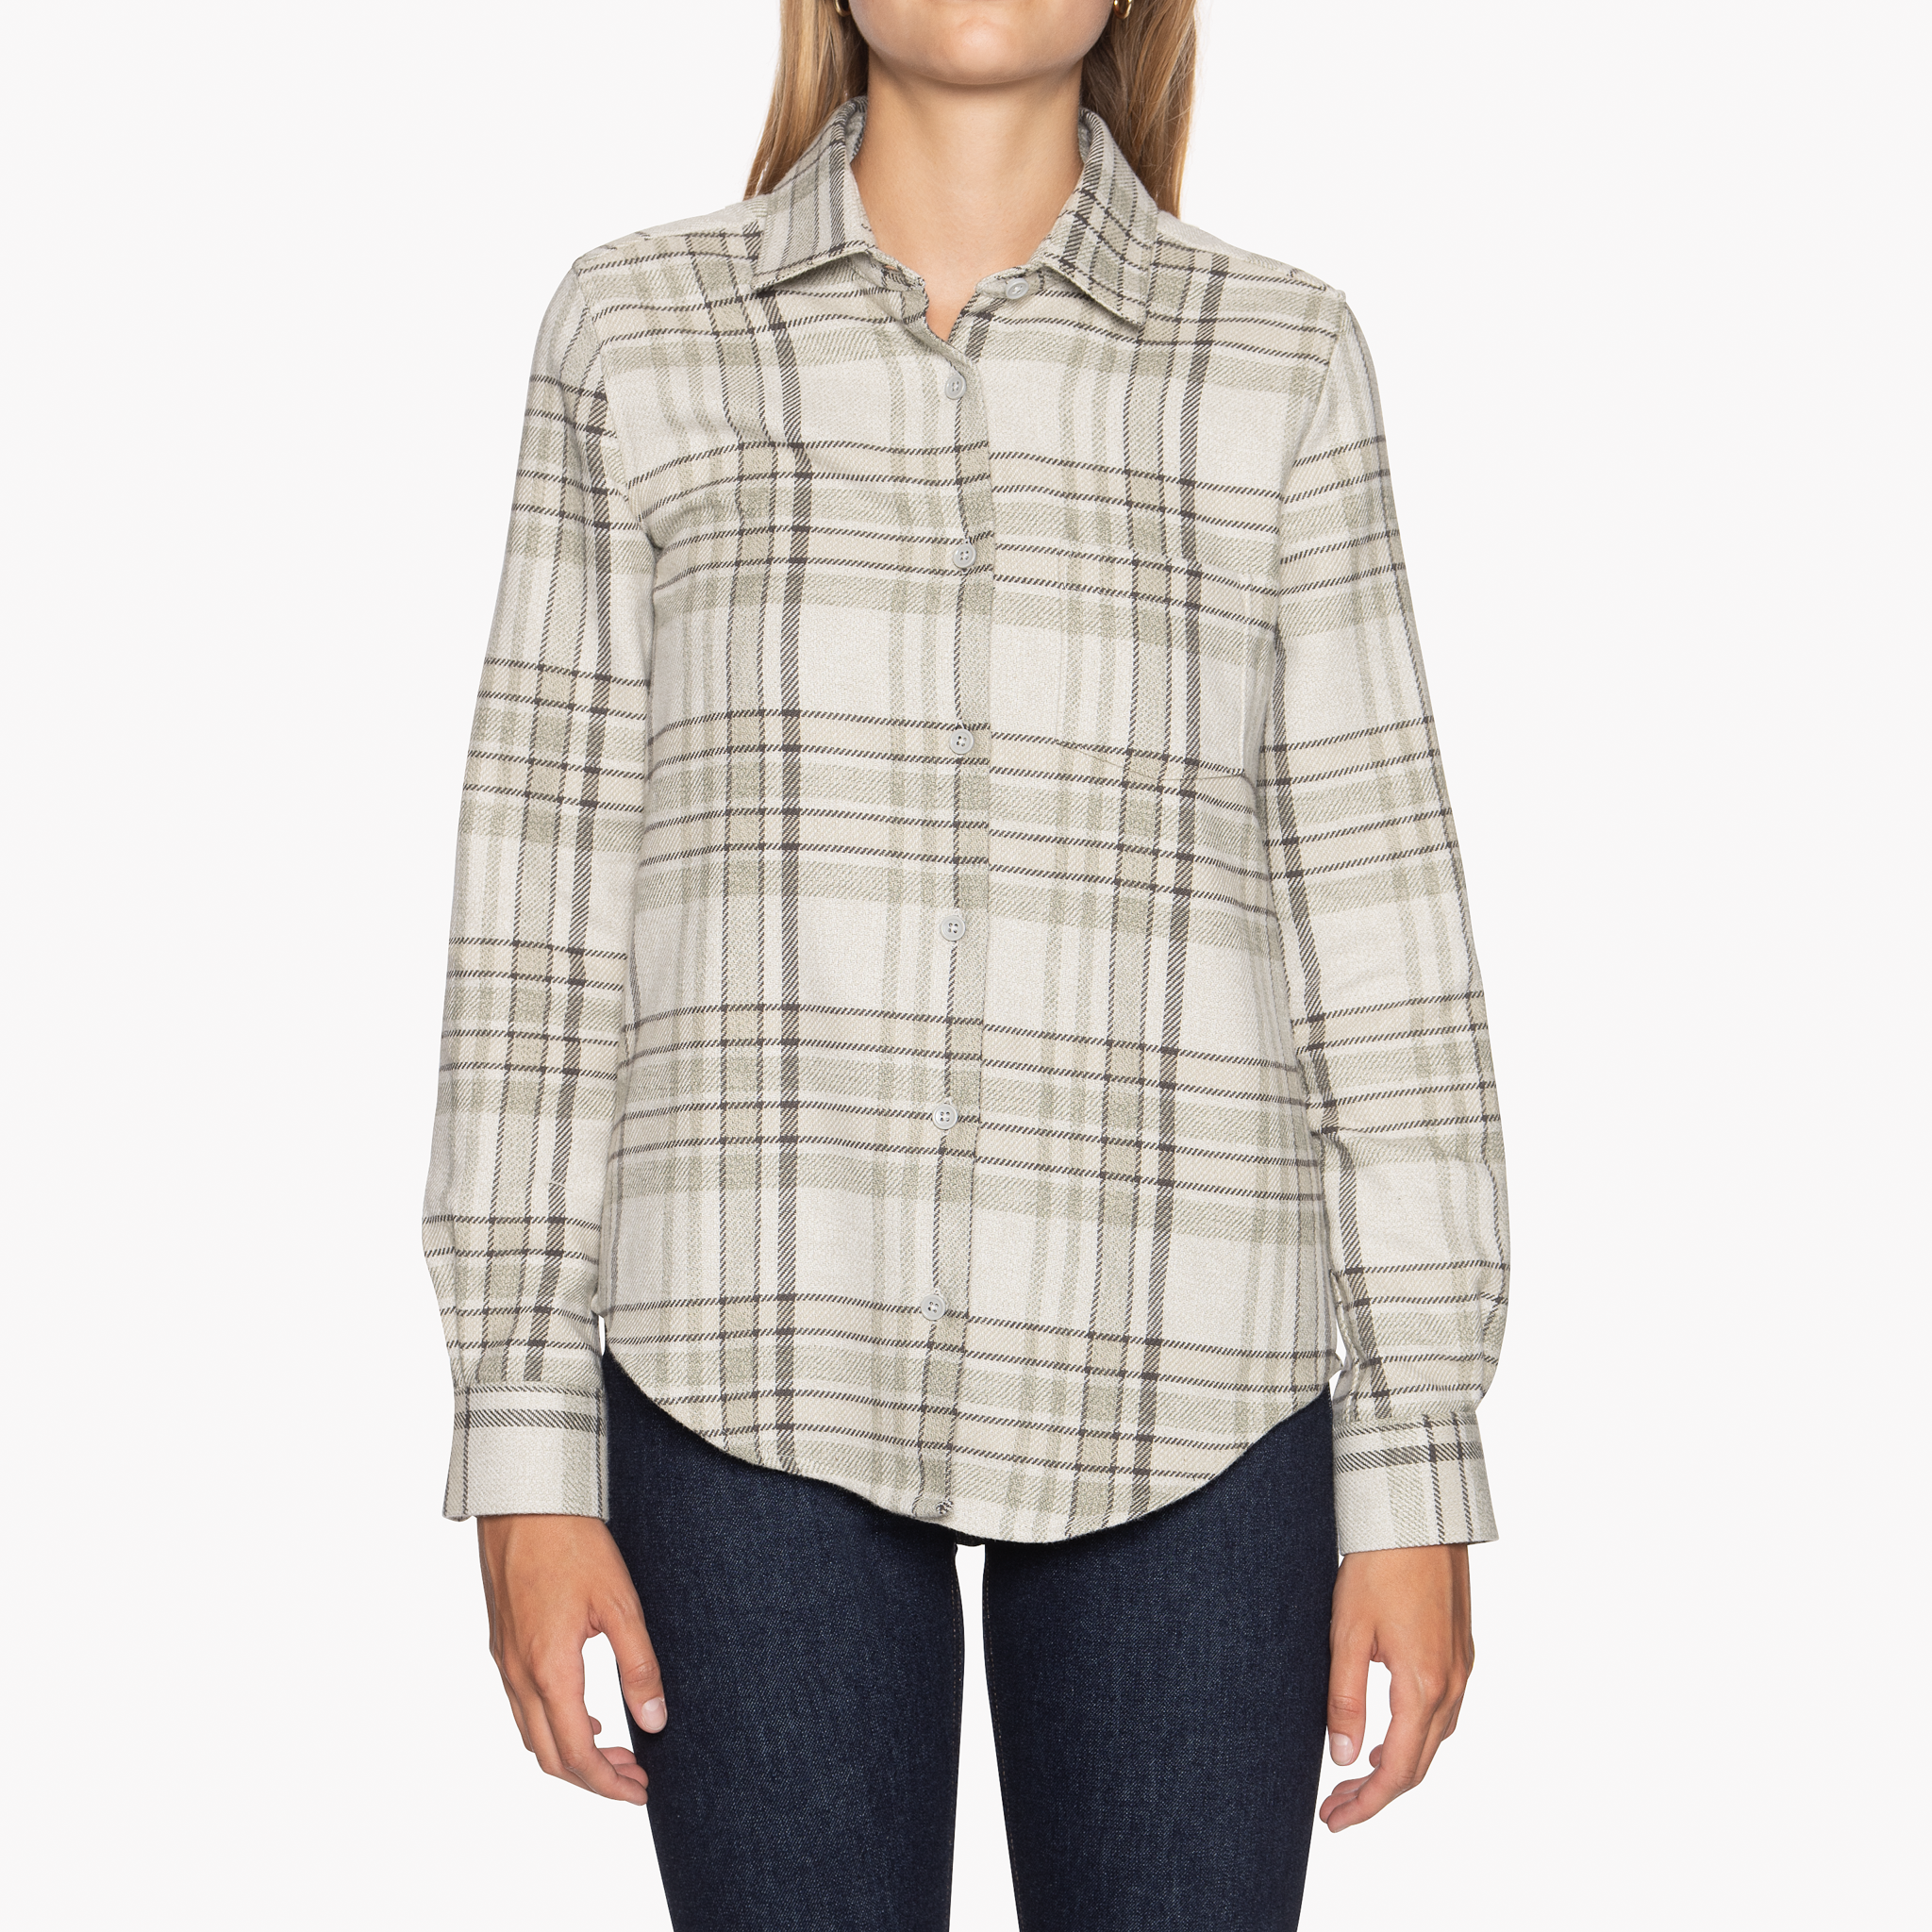  Women’s Country Shirt - Heavy Vintage Flannel - Pale Grey - Front 